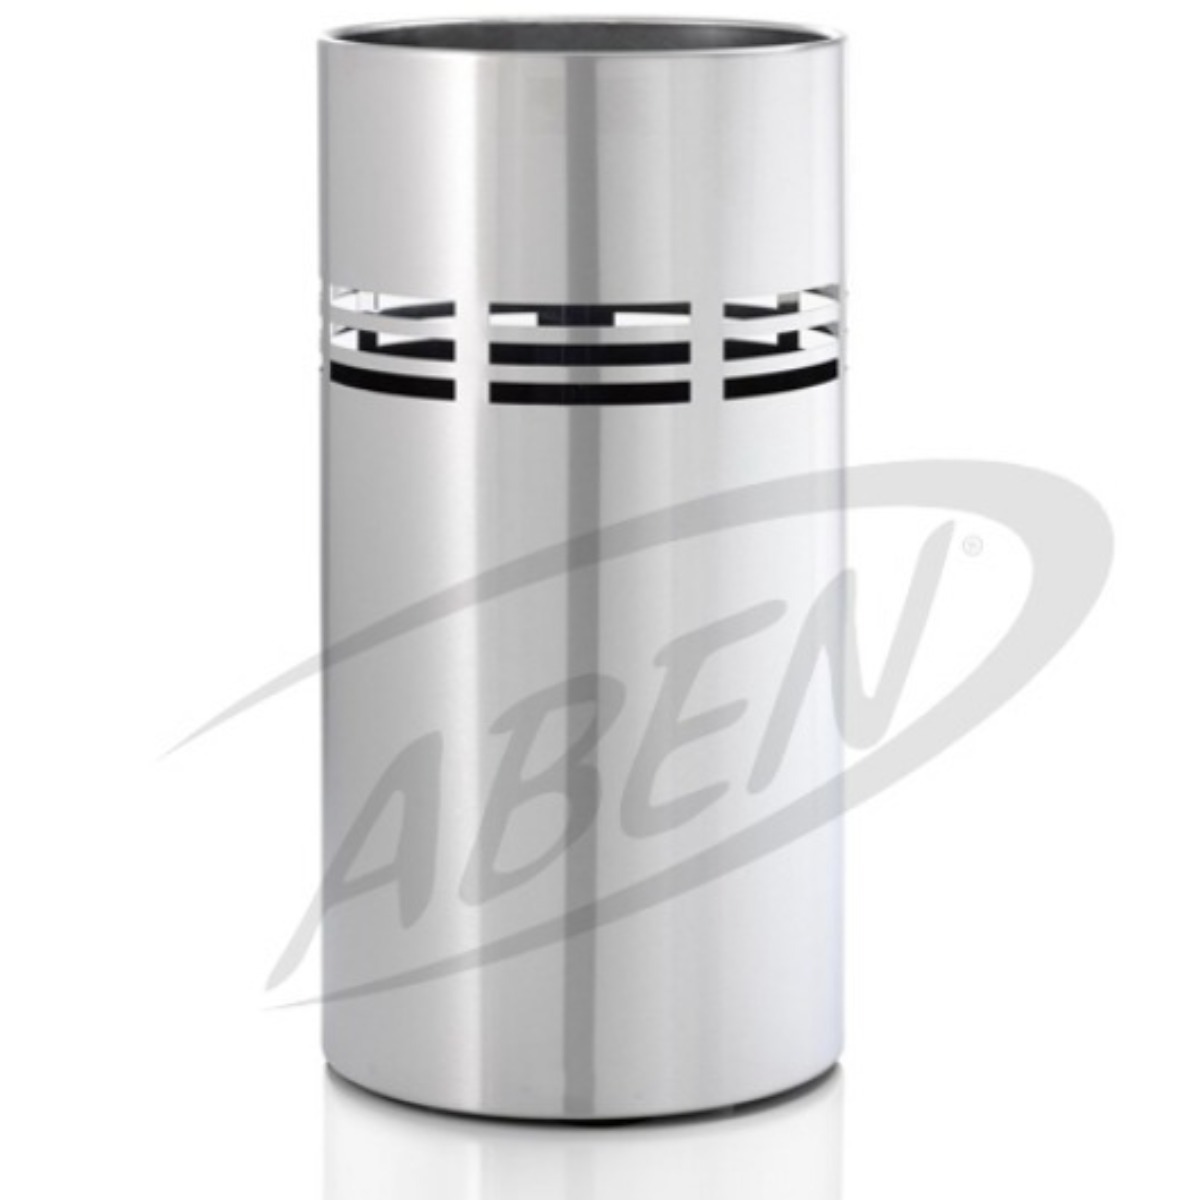 AB-115 Stainless Umbrella Stand